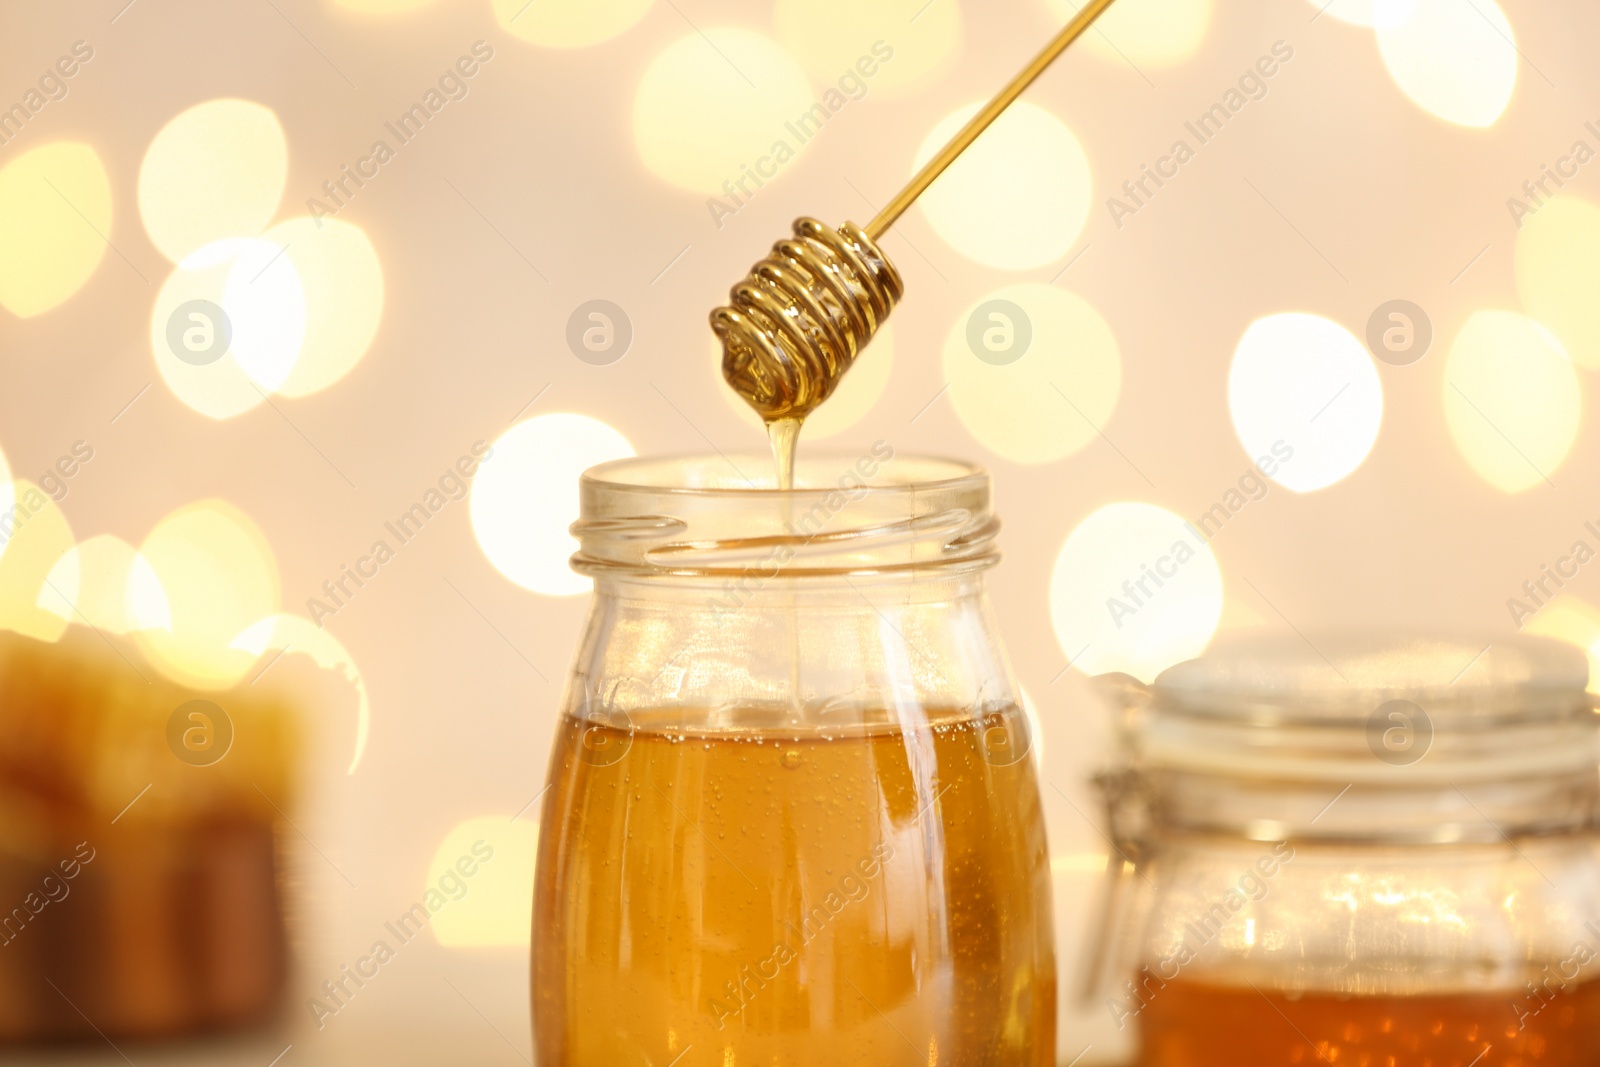 Photo of Honey dripping from dipper into jar against blurred lights, closeup